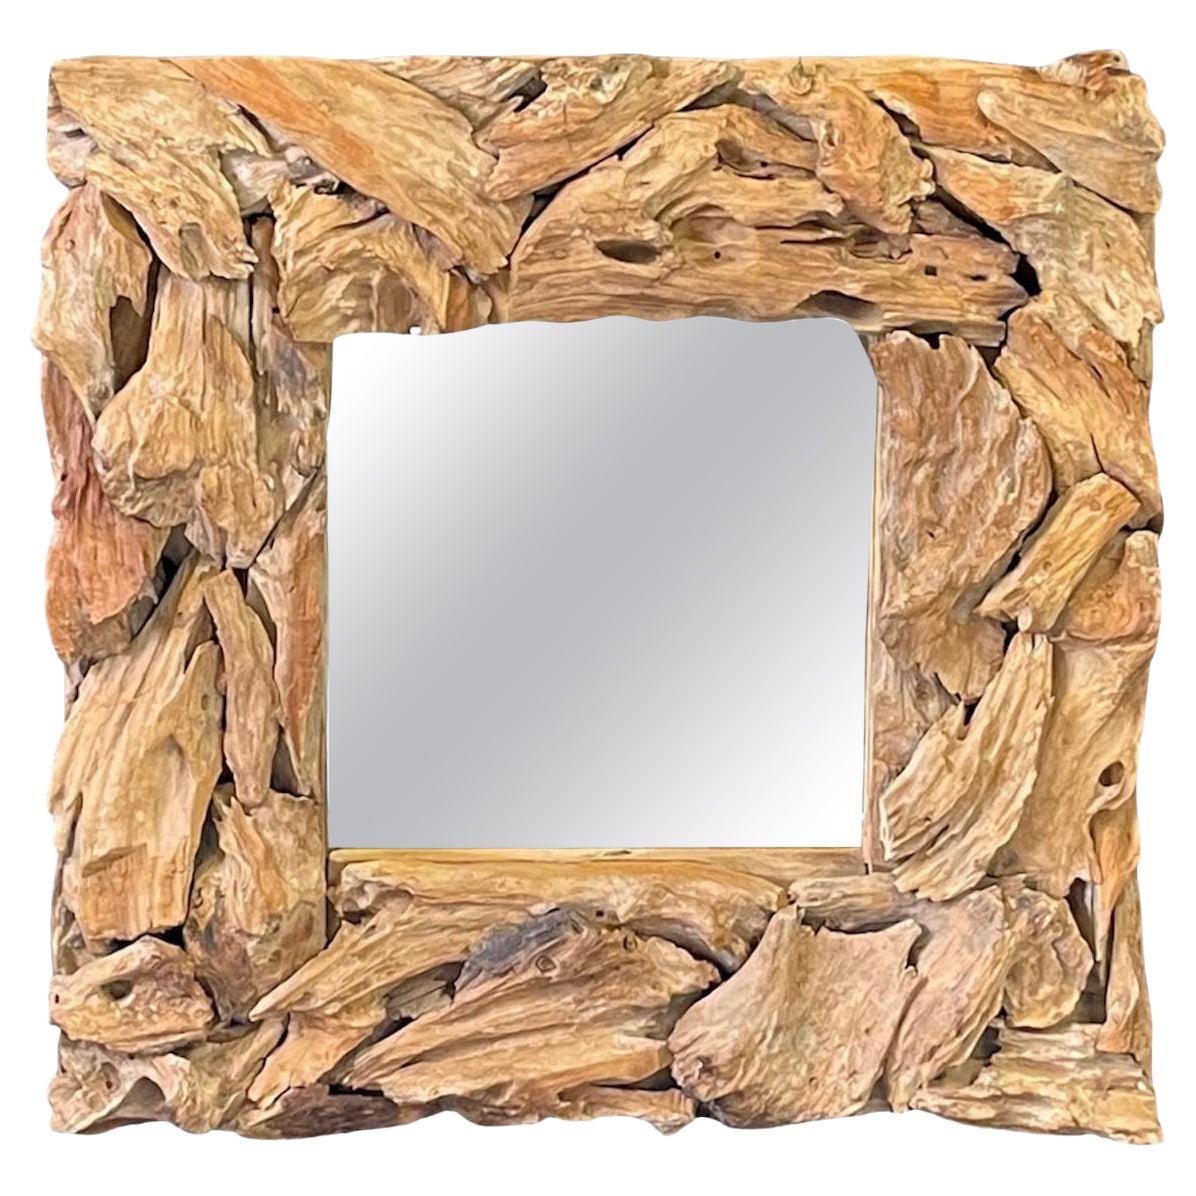 Handcrafted Driftwood Mirror Frame